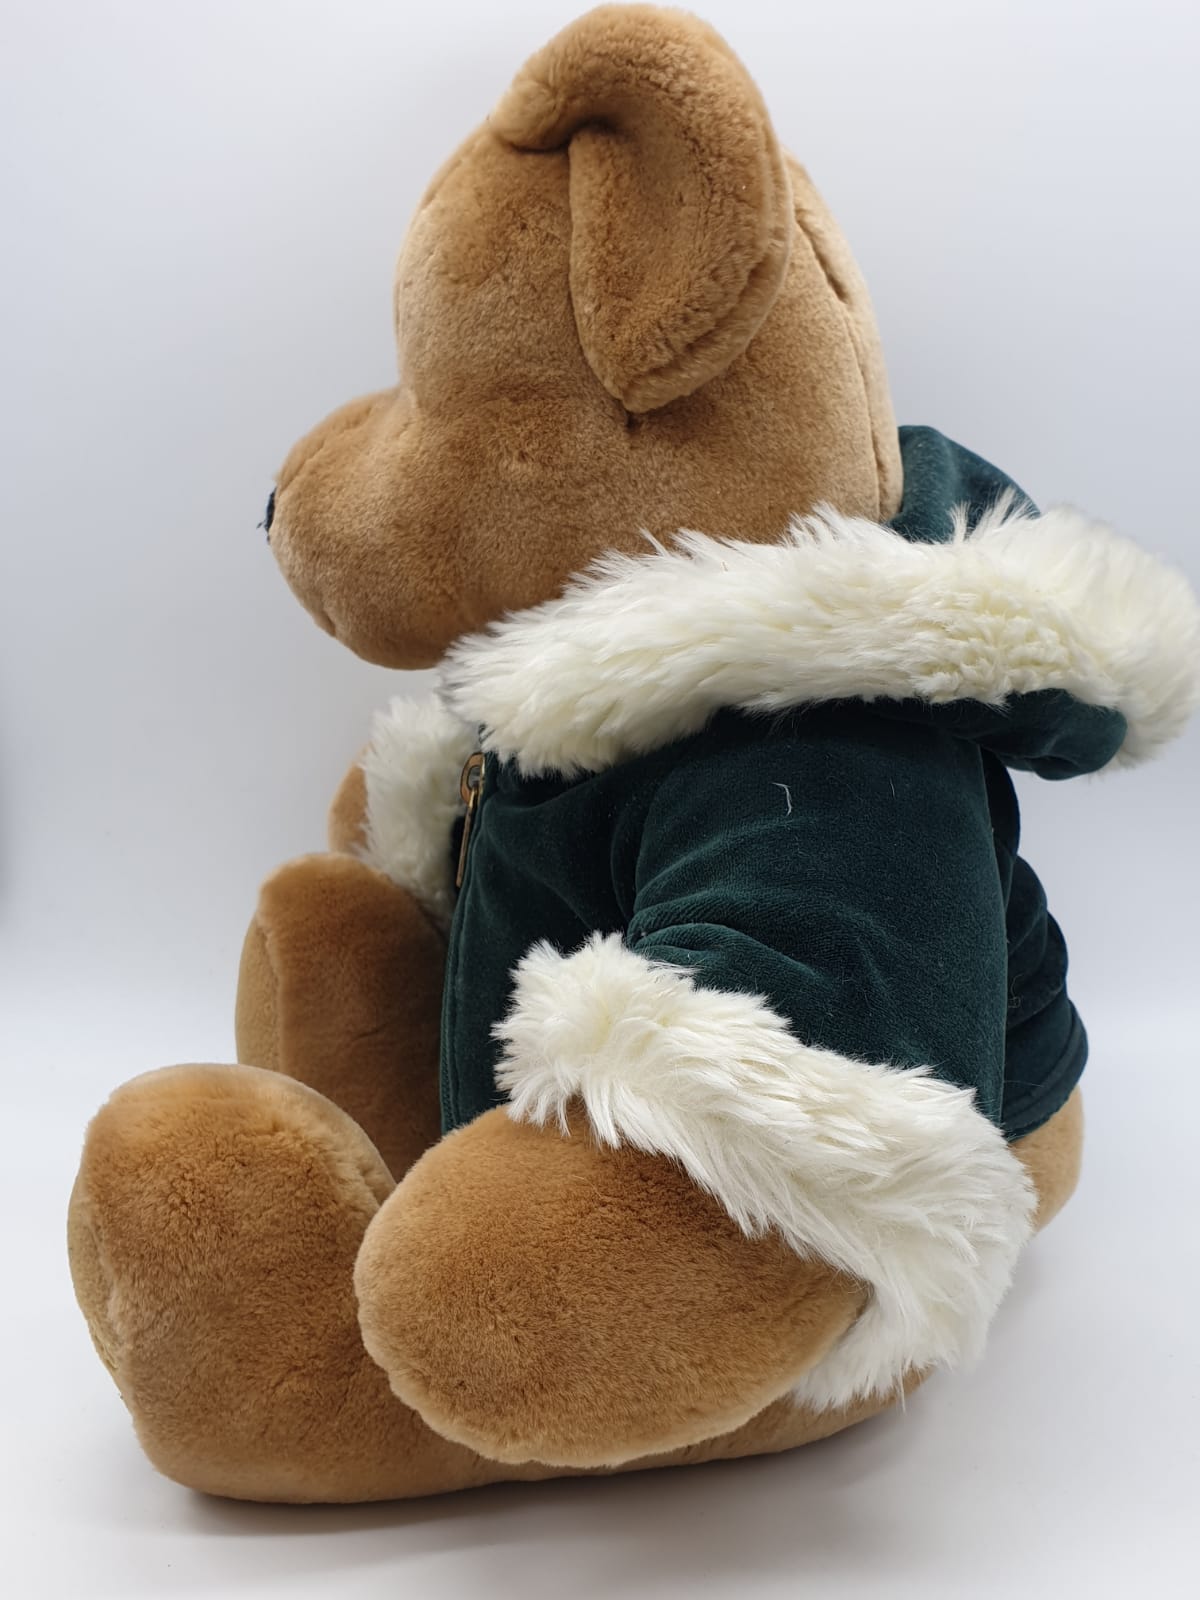 2 Harrods Teddy Bears 2001&2008 approx 40cms, very collectible - Image 7 of 21